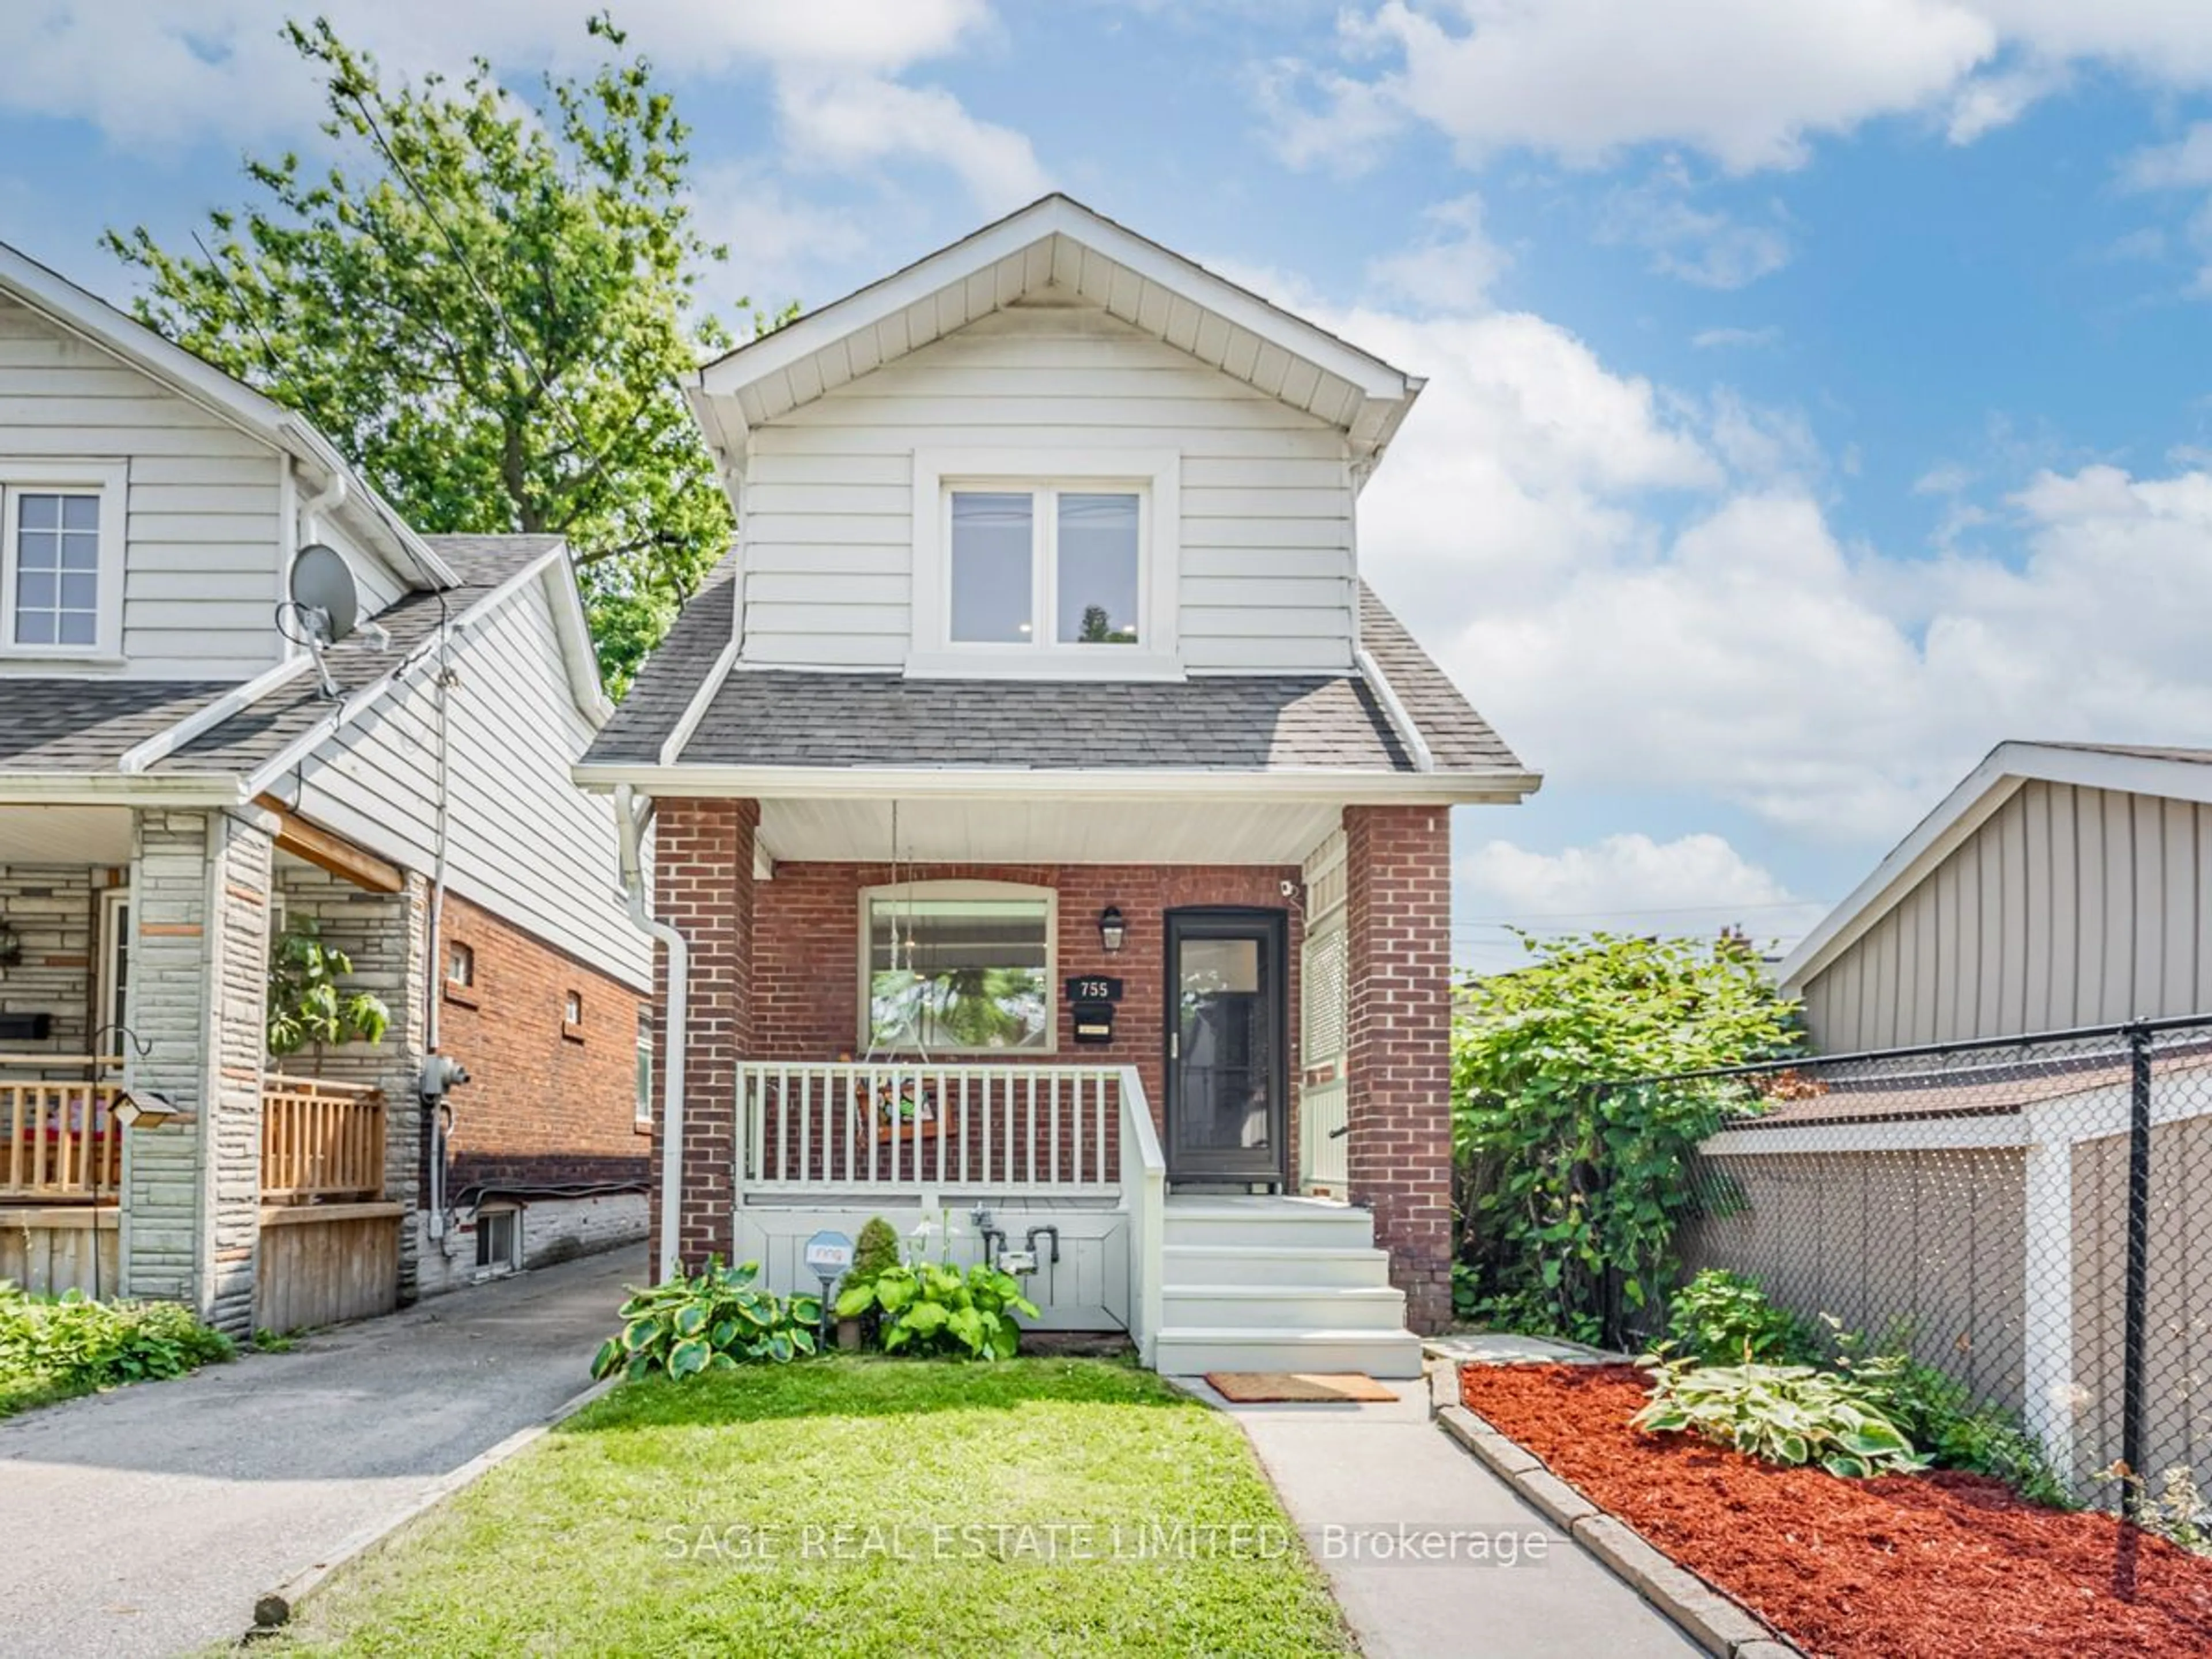 Frontside or backside of a home for 755 Sammon Ave, Toronto Ontario M4C 2E6